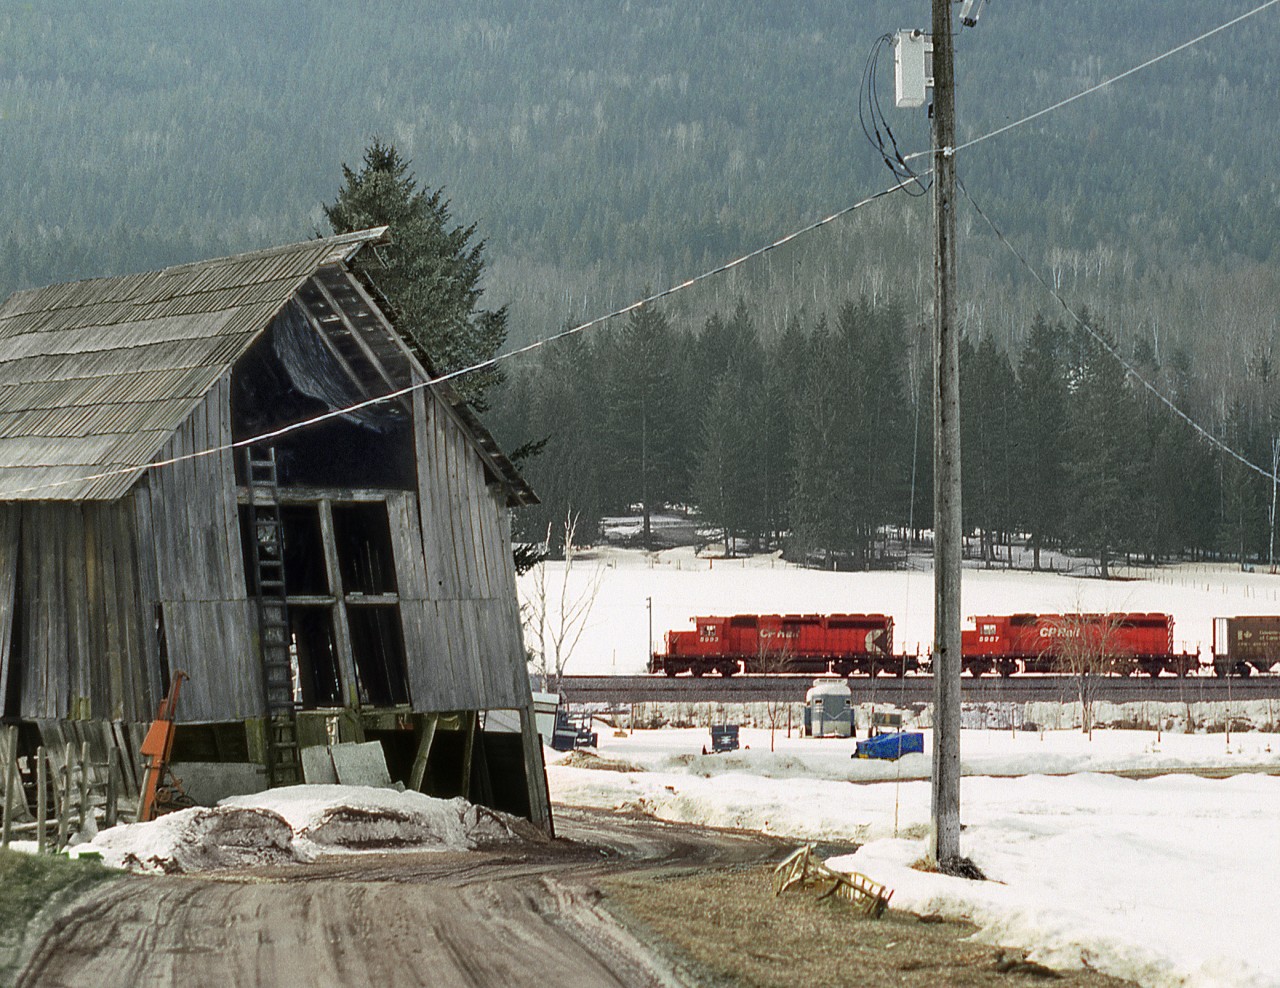 An eastbound grain empties heads downgrade from Notch Hill Summit passing a derelict bar. Notch hill is ridge between Salmon Arm and Chase between the two arms of the U shaped Shuswap Lake